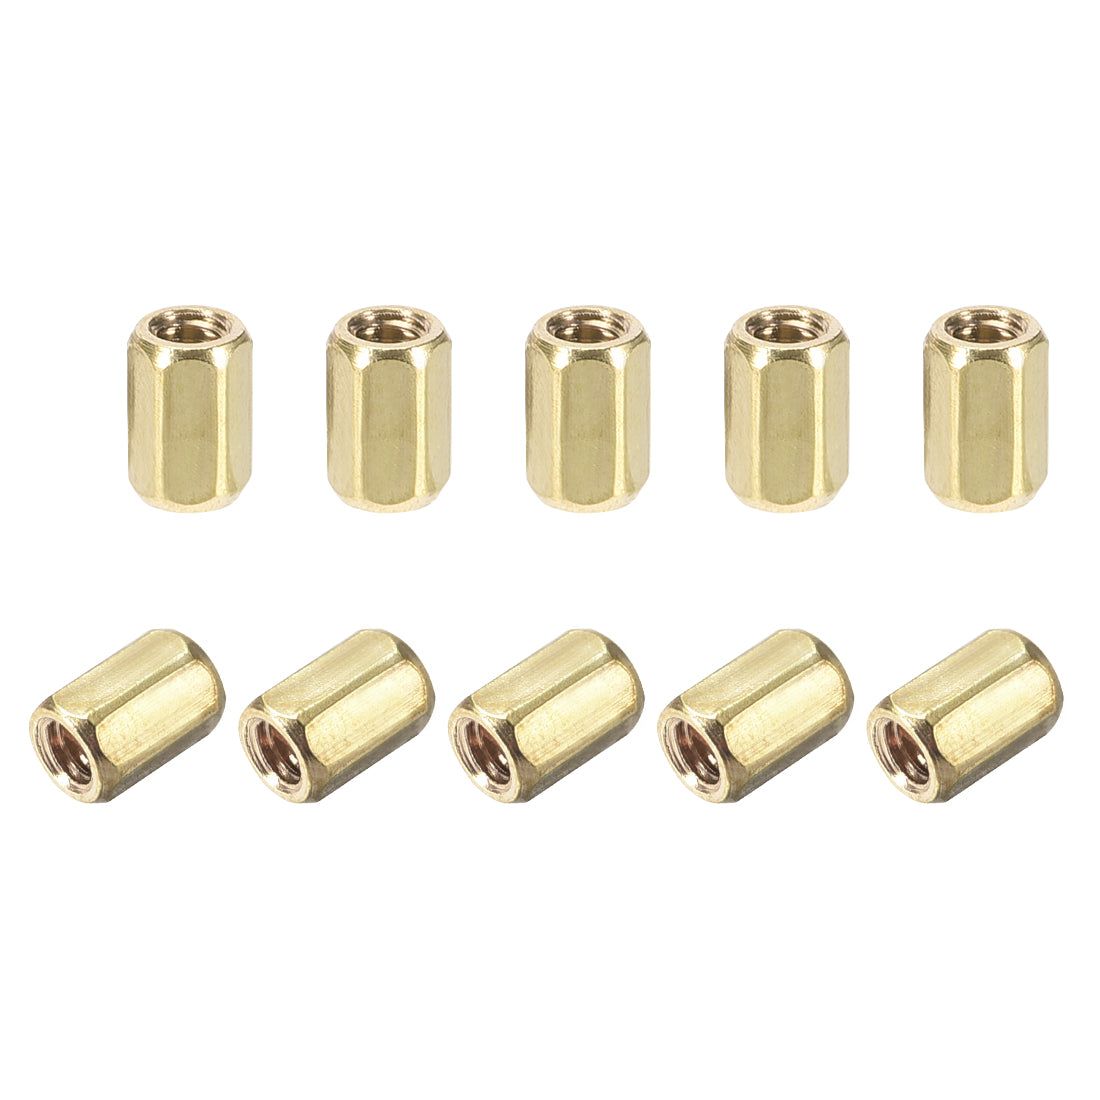 Uxcell Uxcell M2 x 10mm Female to Female Hex Brass Spacer Standoff 50pcs